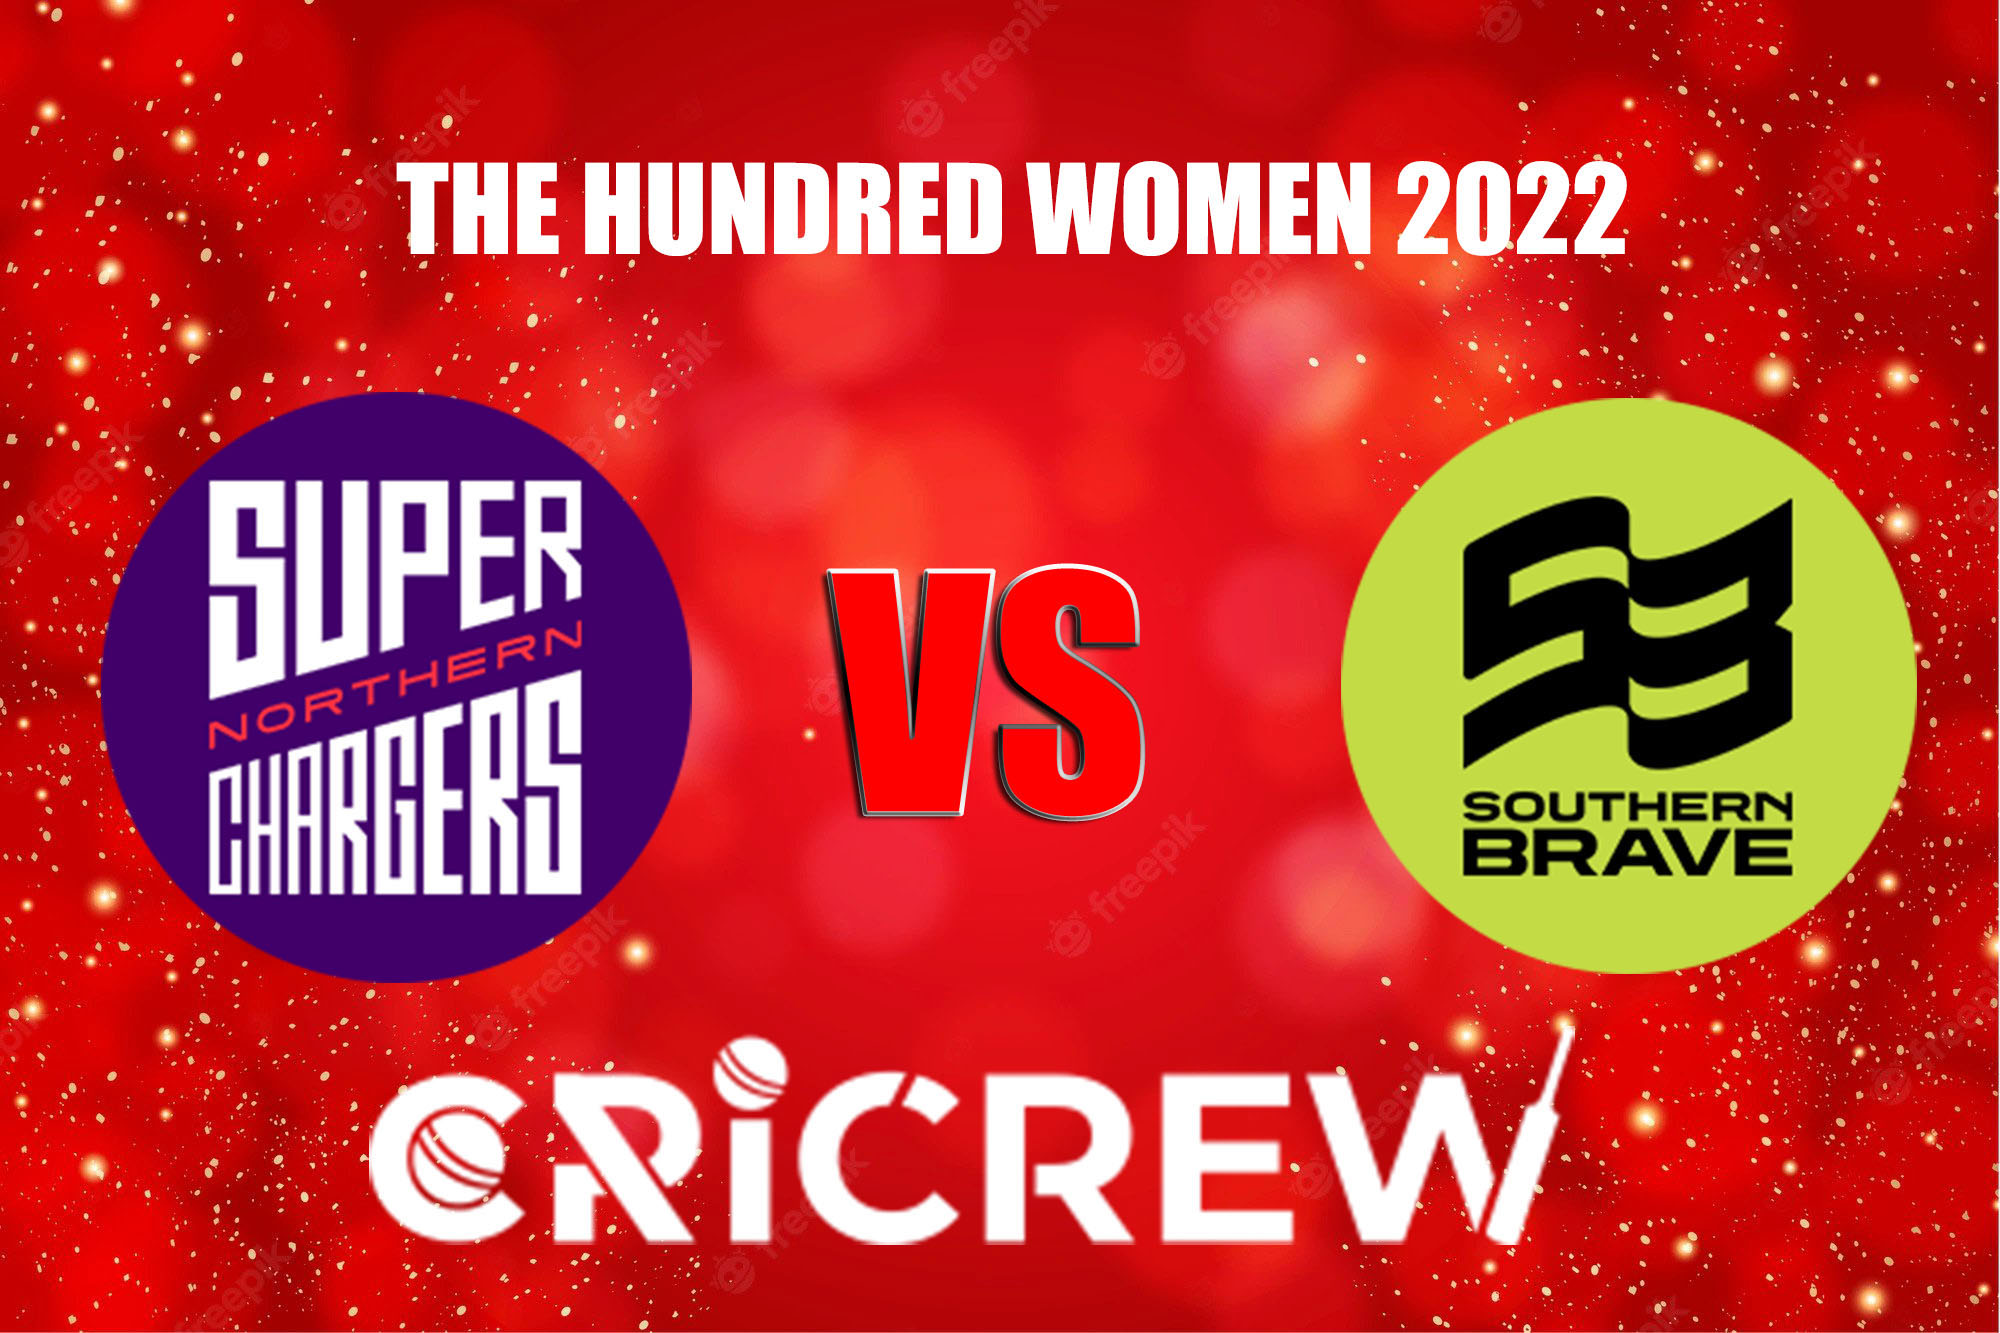 MNR-W vs OVI-W Live Score starts on 31 Aug 2022, Wed, 7:00 PM IST at Headingley, Leeds. Here on www.cricrew.com you can find all Live, Upcoming and Recent Match